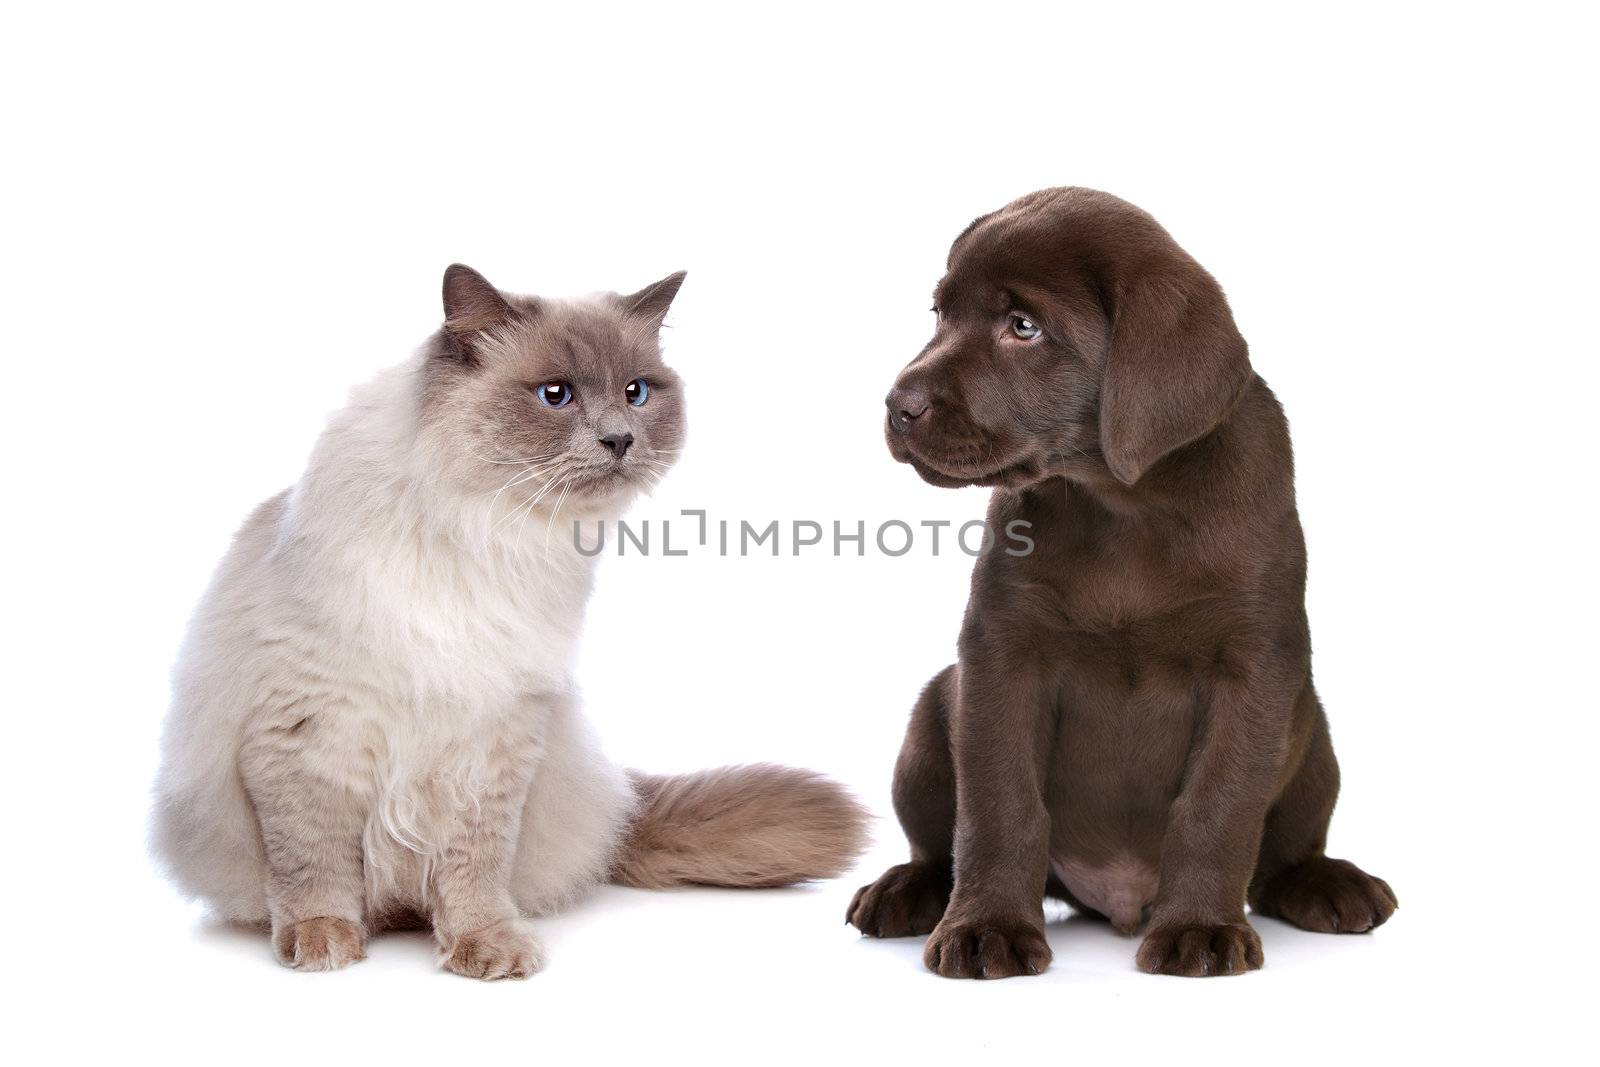 a purebred cat and a chocolate Labrador puppy in front of a white background